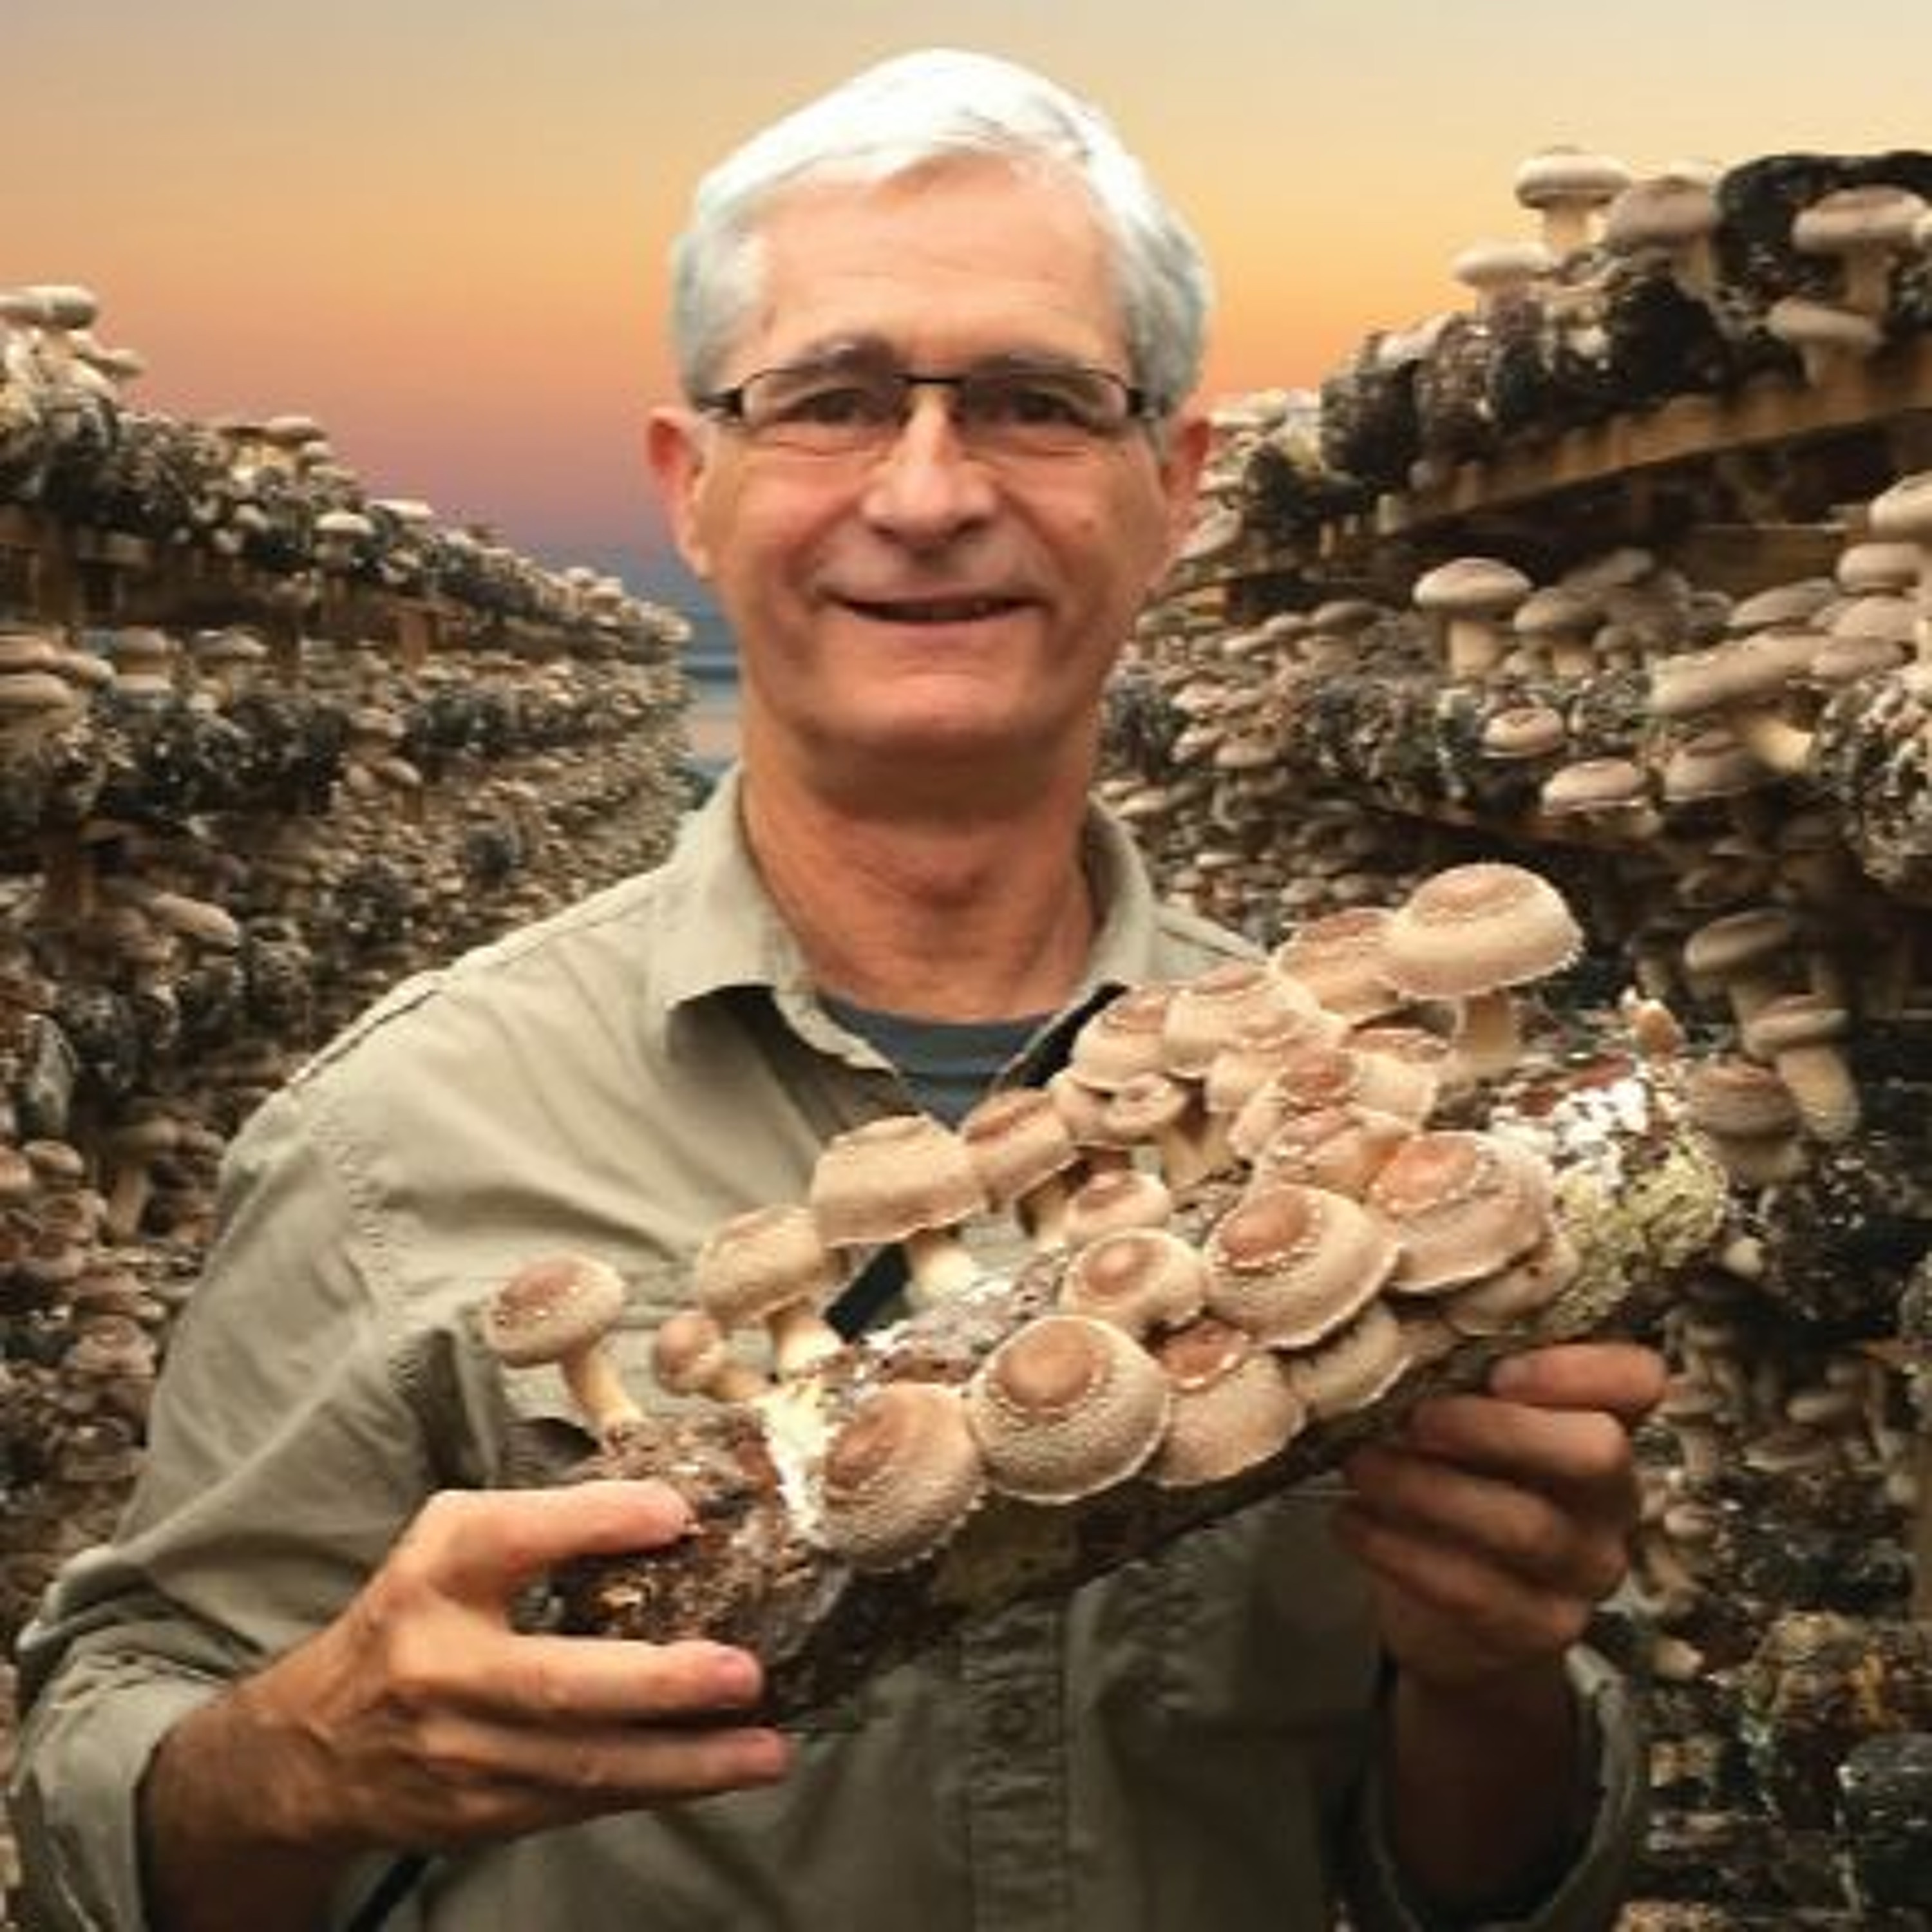 Health Benefits Of Nutritional And Supplemental Mushrooms With Jeff Chilton